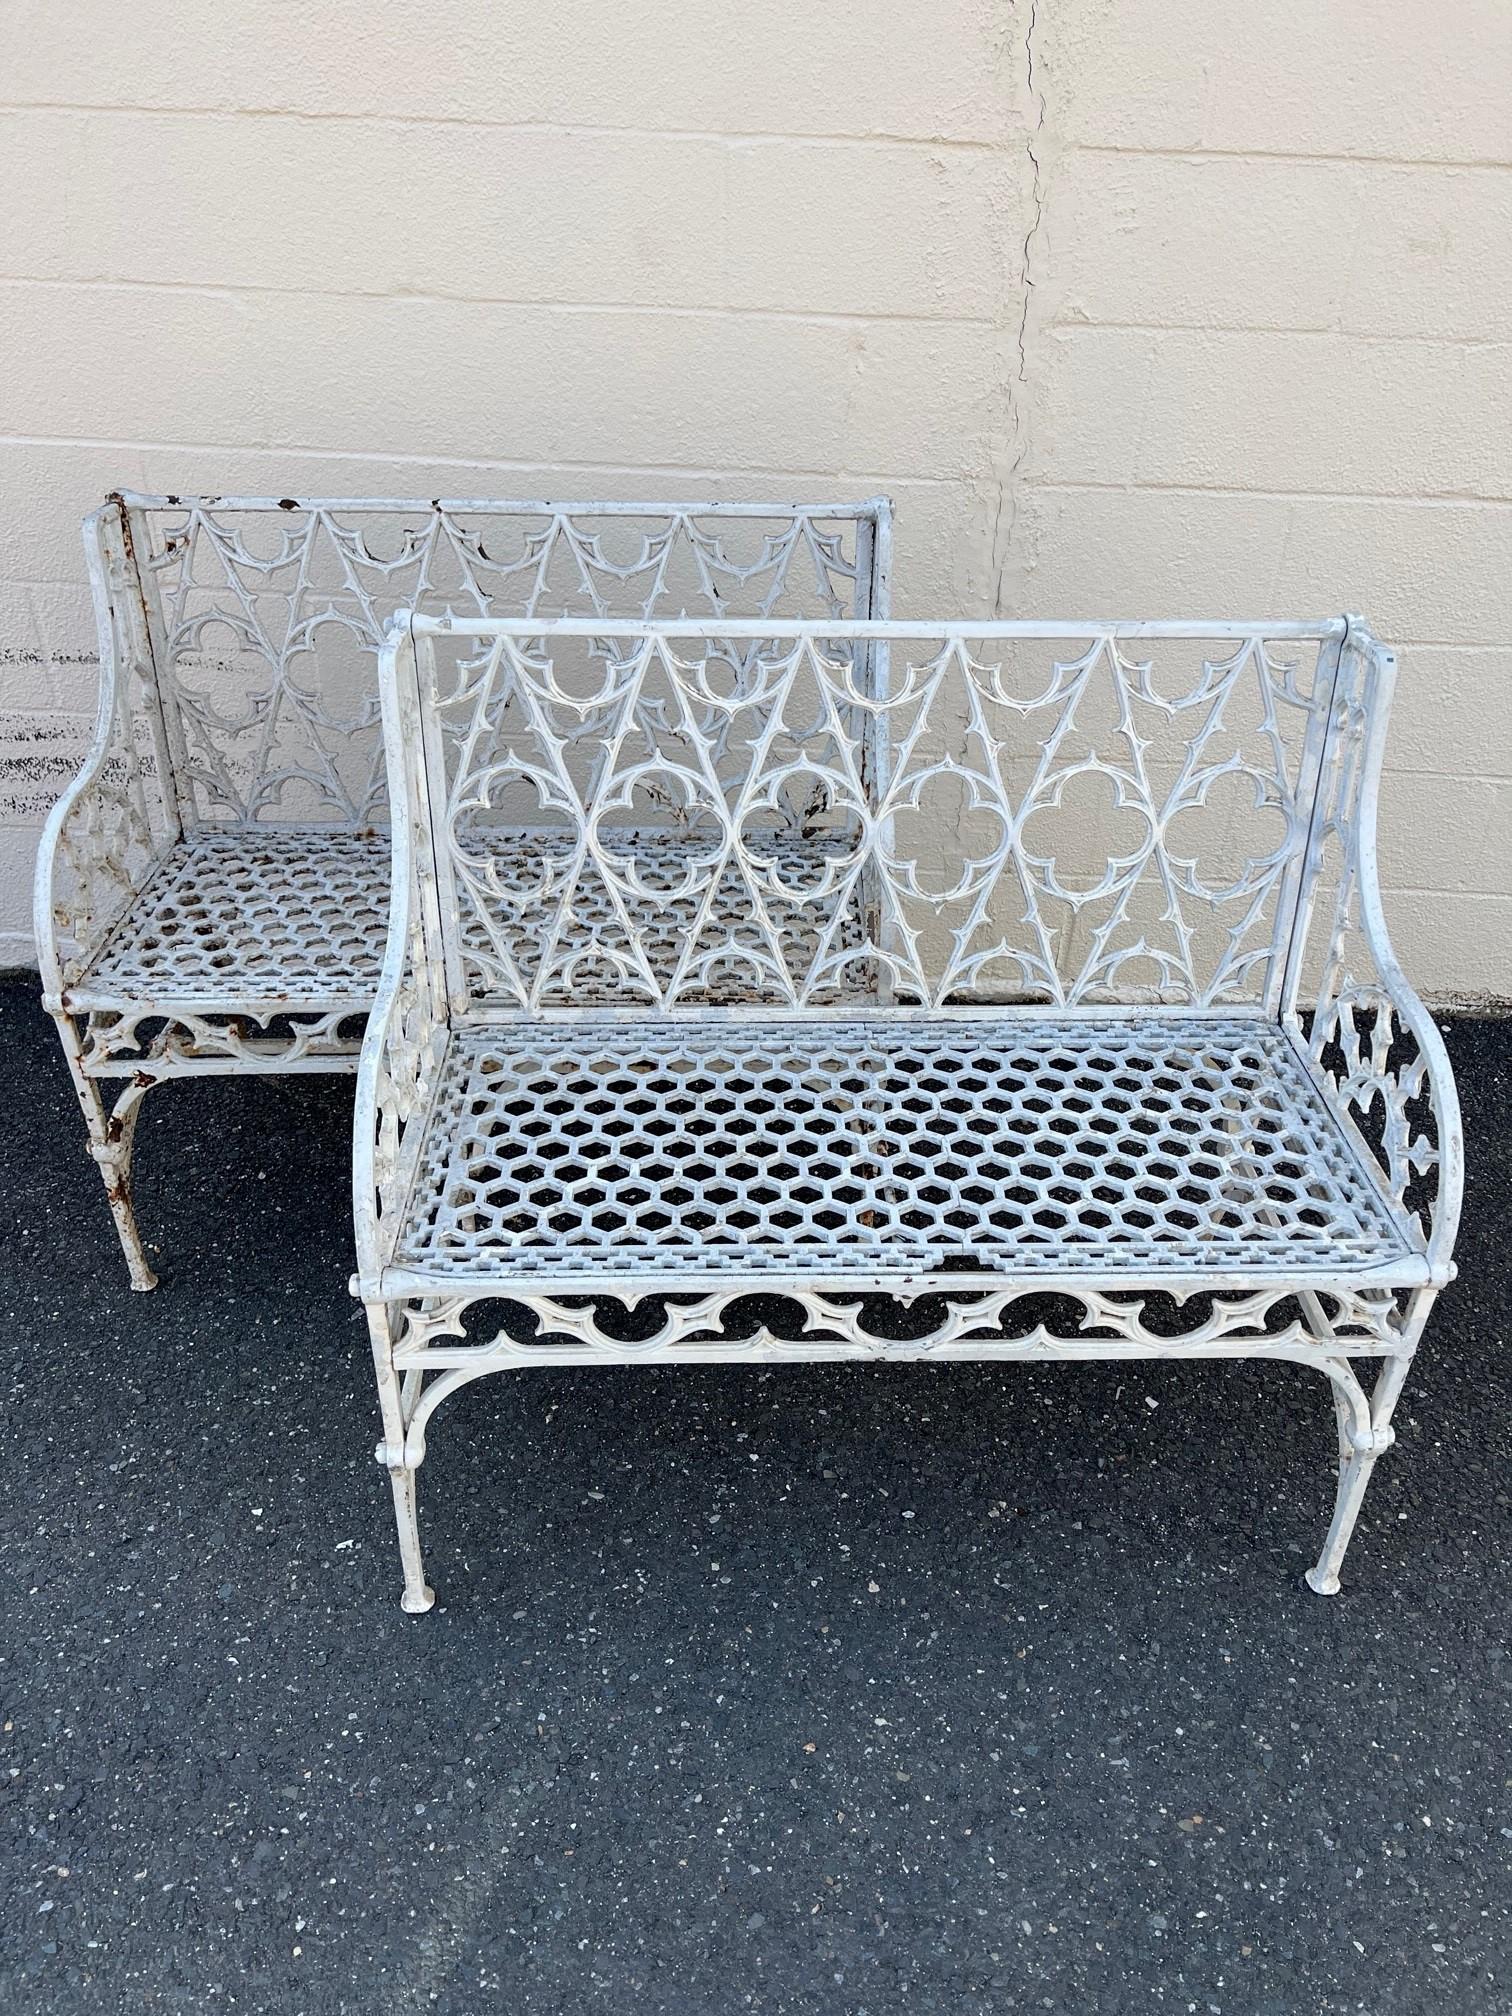 Pair of English Coalbrookdale foundry style iron gothic revival garden benches. Made in the dramatic gothic revival taste featuring a gothic tracery backrest centered by quatrefoil designs simple stunning. The seat has a honeycomb pierced design